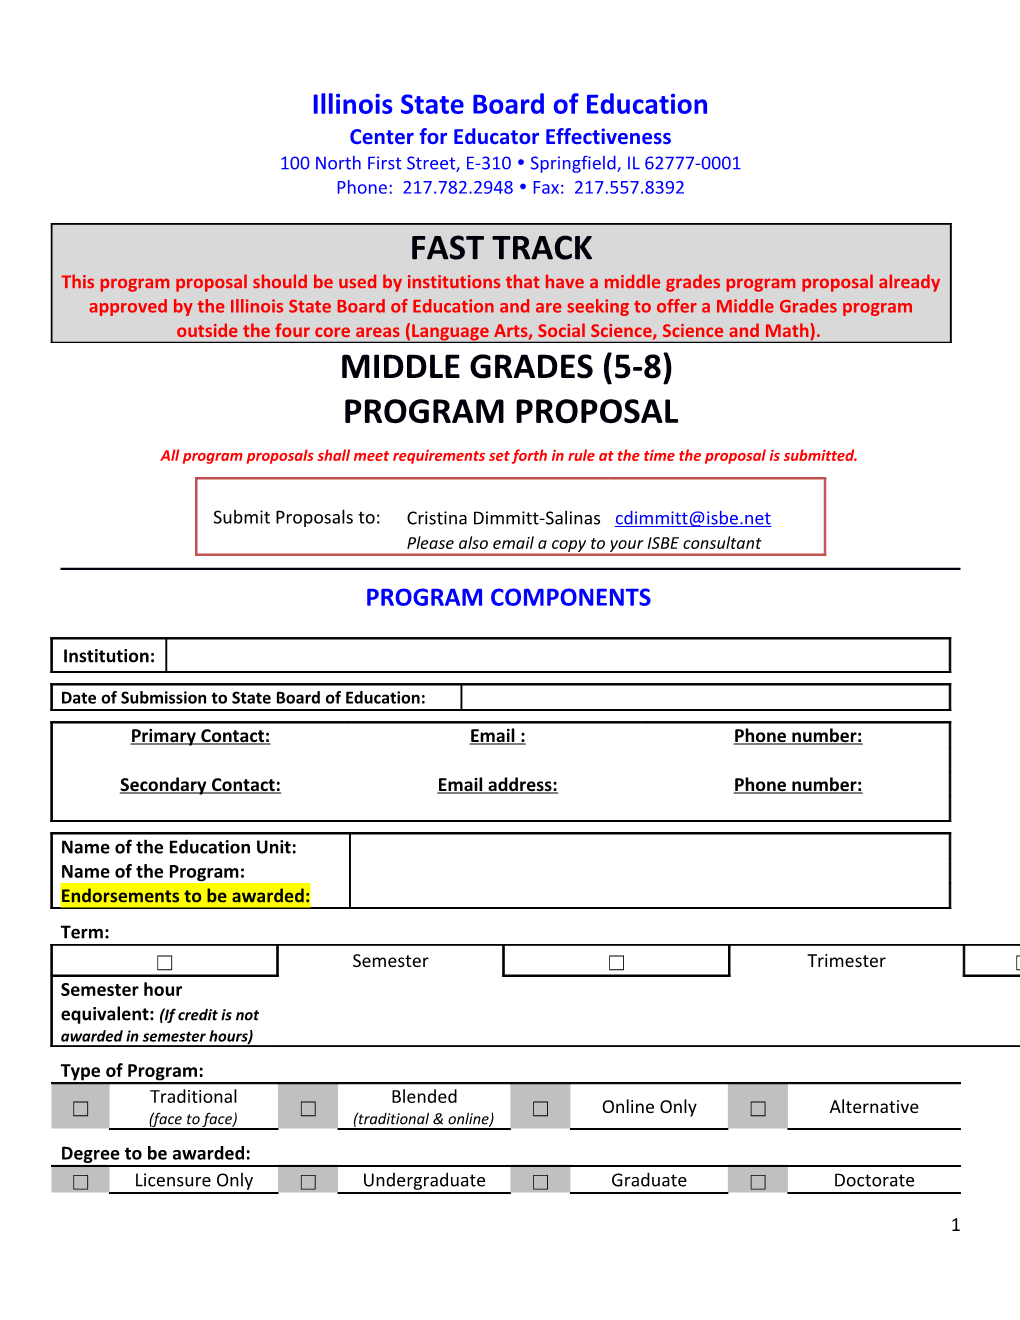 Middle Grades Fast Track (5-8)